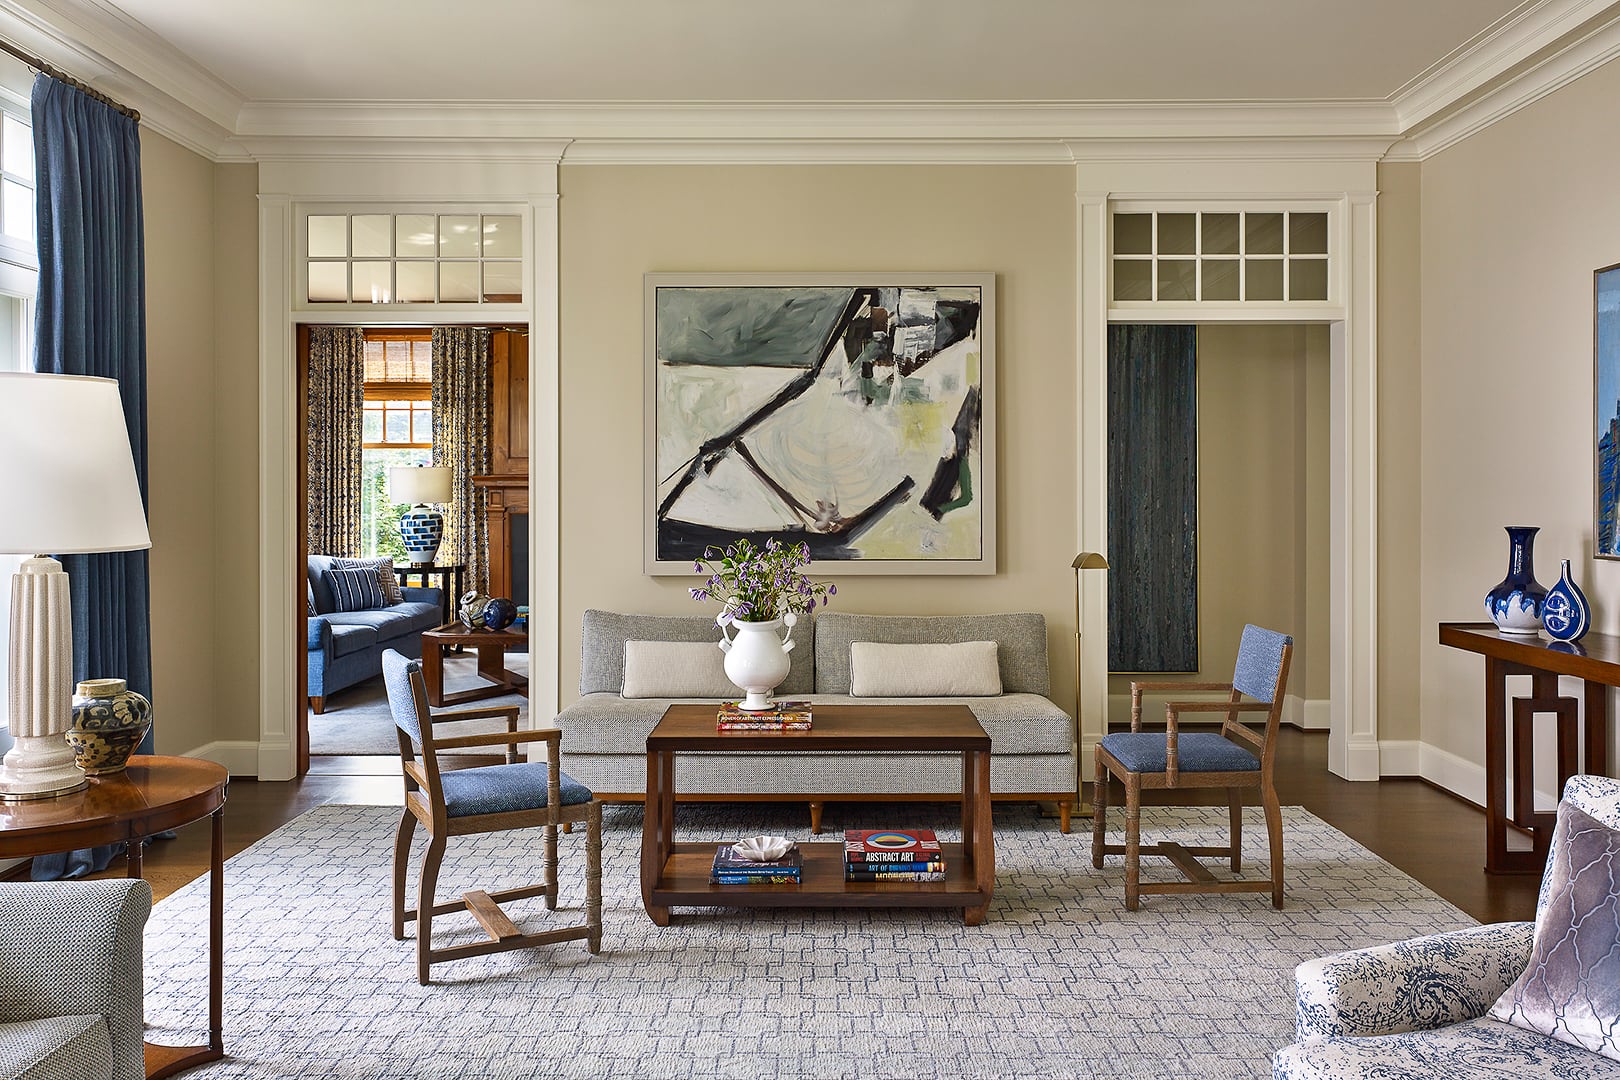 To one side of the living room, en route to the paneled library, a second seating area invites casual conversation with its armless sofa. The coffee table and chairs are French, with silhouettes establishing a note of continental modernity. Completing the tableau is The Studio, a 1952 canvas by female Abstract Impressionist Yvonne Thomas, who has garnered considerable attention in the years since her death.